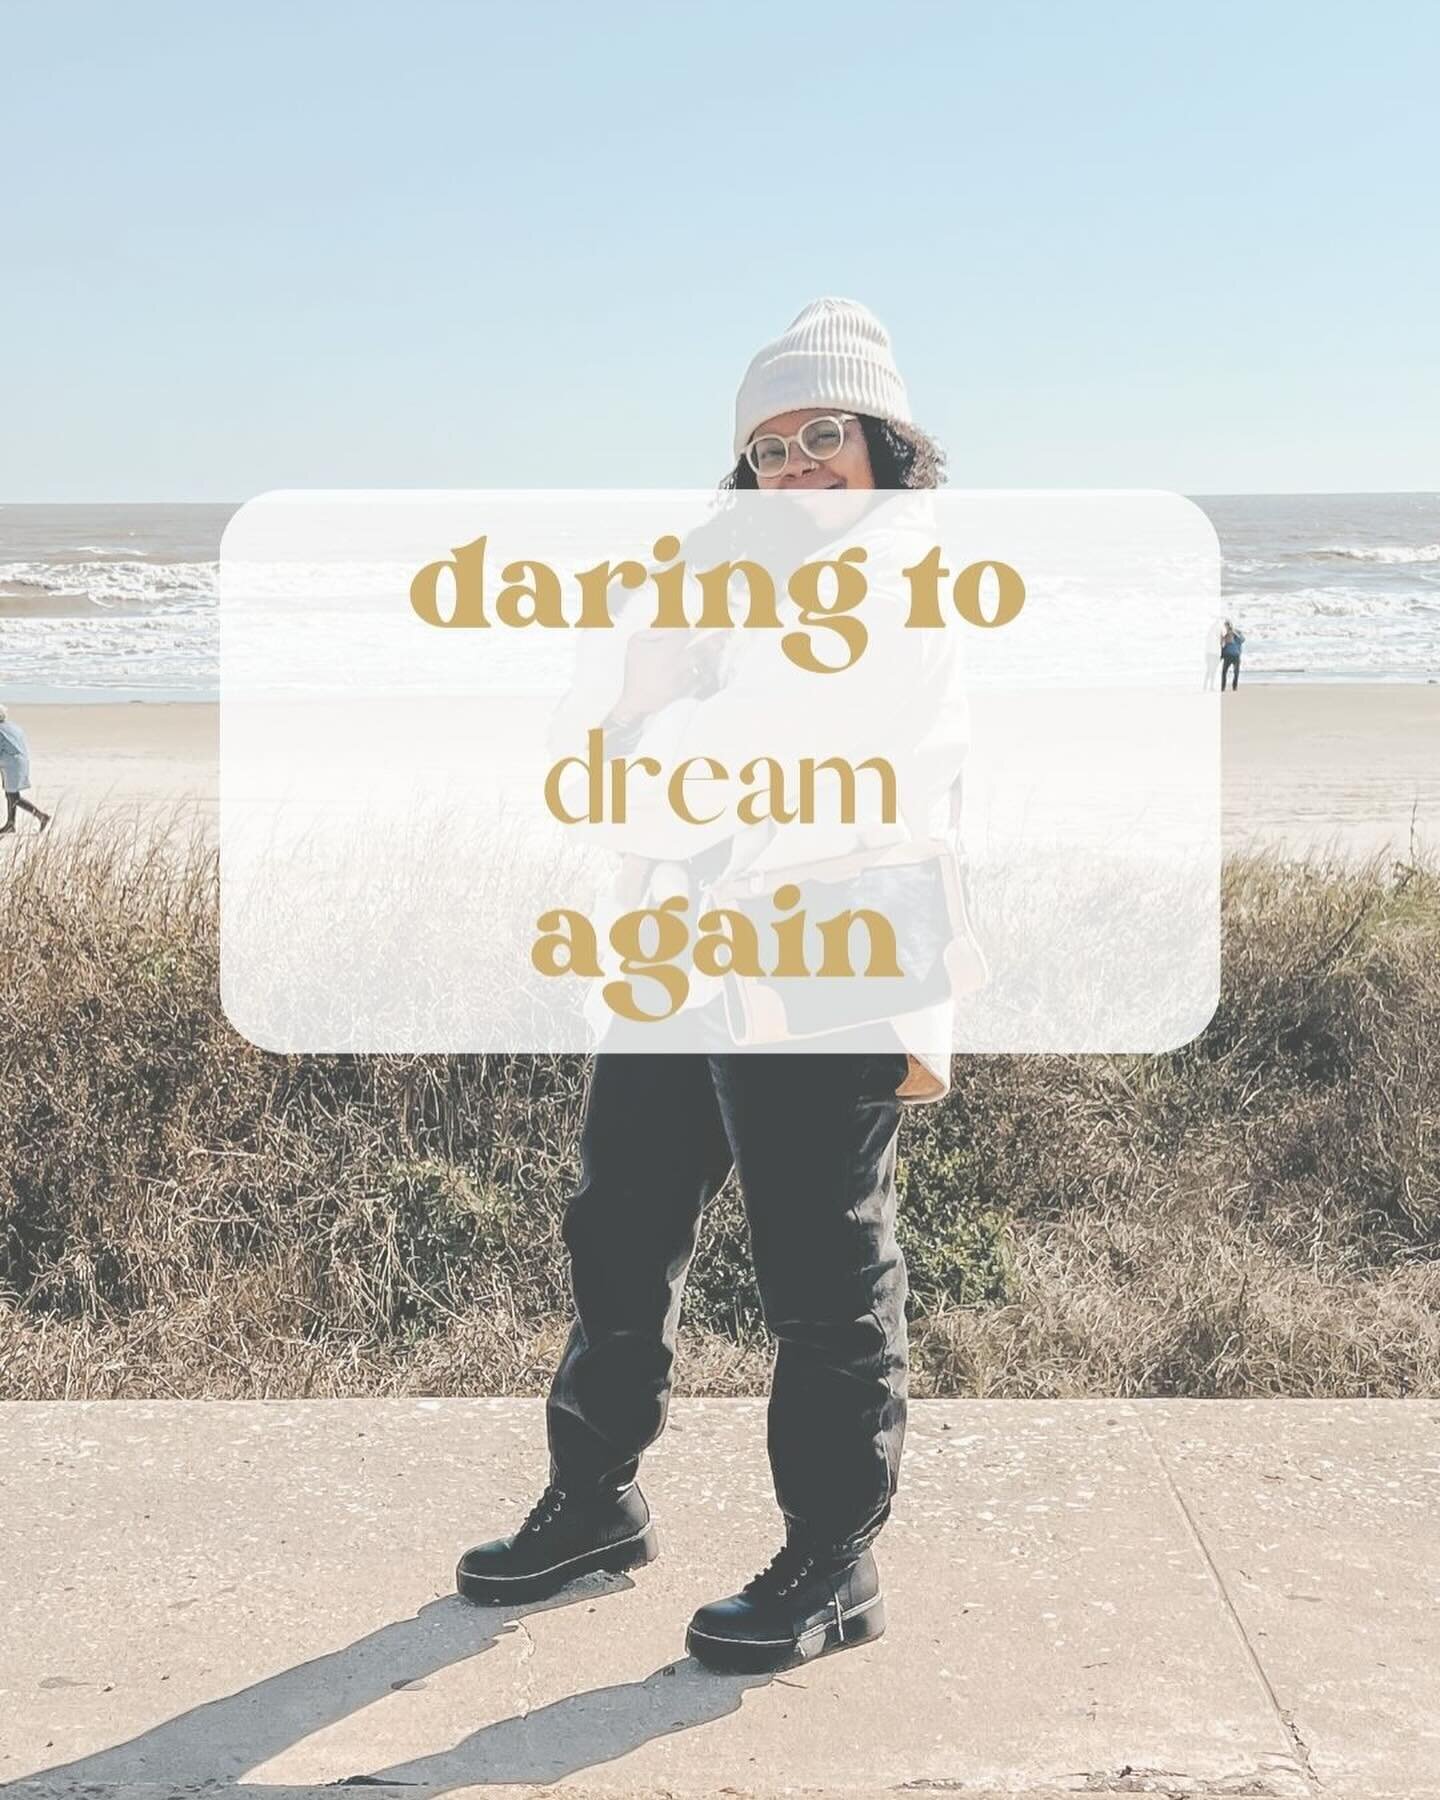 ✨daring to dream again✨

Can I say out loud how honestly terrified I was about this kickstarter campaign? 

It&rsquo;s been four years since I self-published my last book, and for a whole year there, I put dreams on the back burner. 

It felt too ris